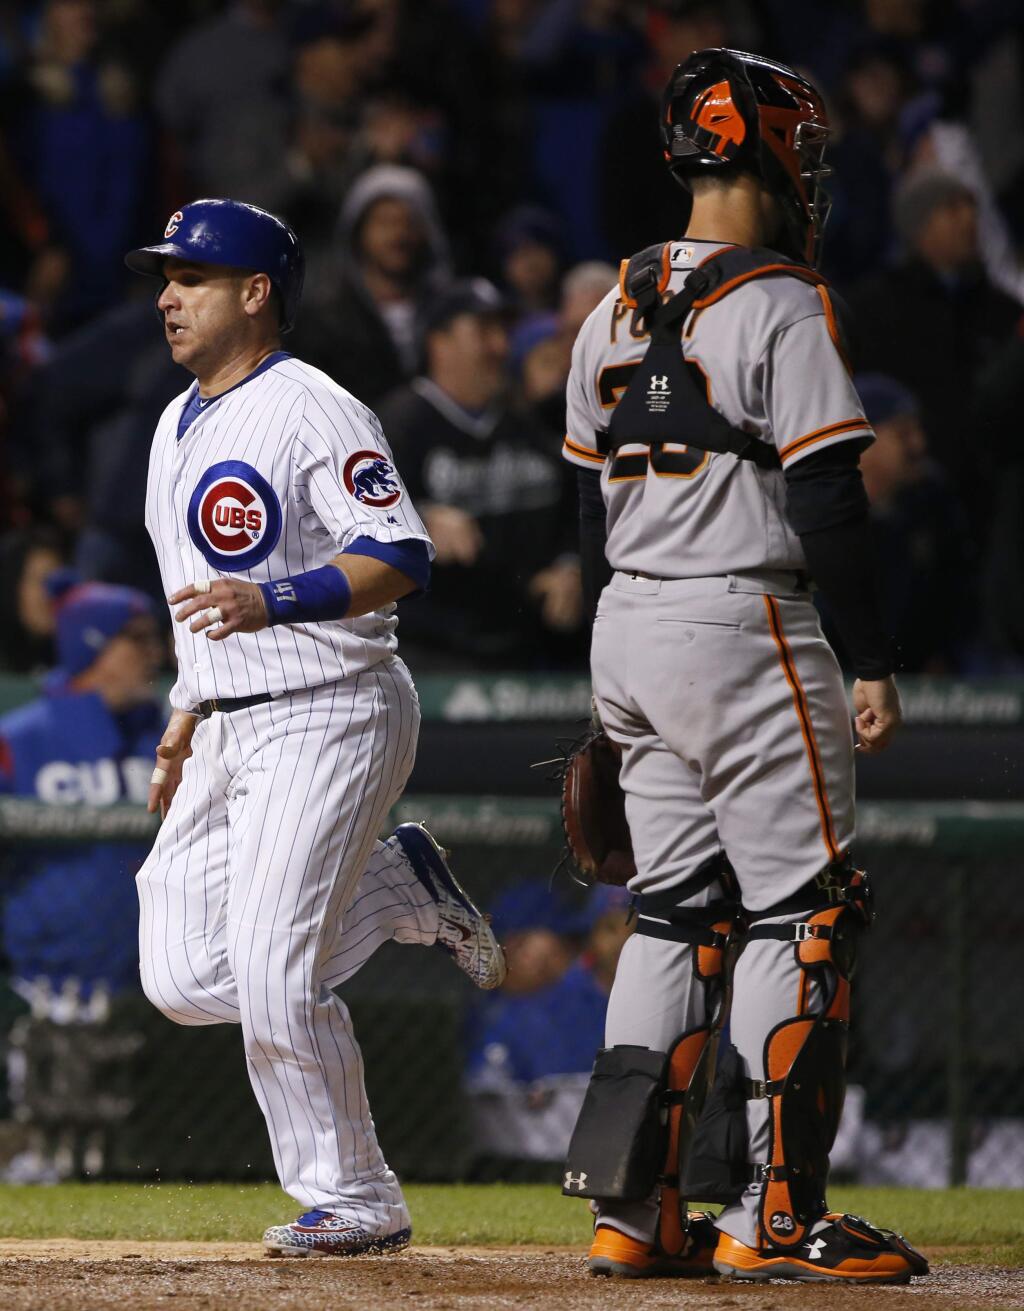 Chicago Cubs' Miguel Montero, left, scores on a sacrifice bunt by Javier Baez as San Francisco Giants catcher Buster Posey waits for the ball during the seventh inning of a baseball game, Wednesday, May 24, 2017, in Chicago. (AP Photo/Nam Y. Huh)